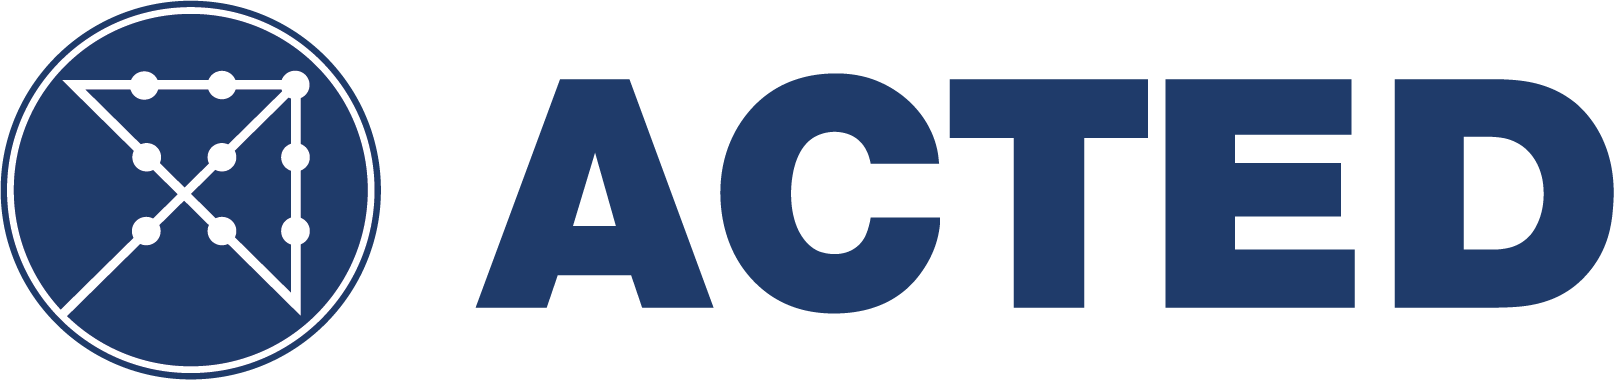 ACTED logo